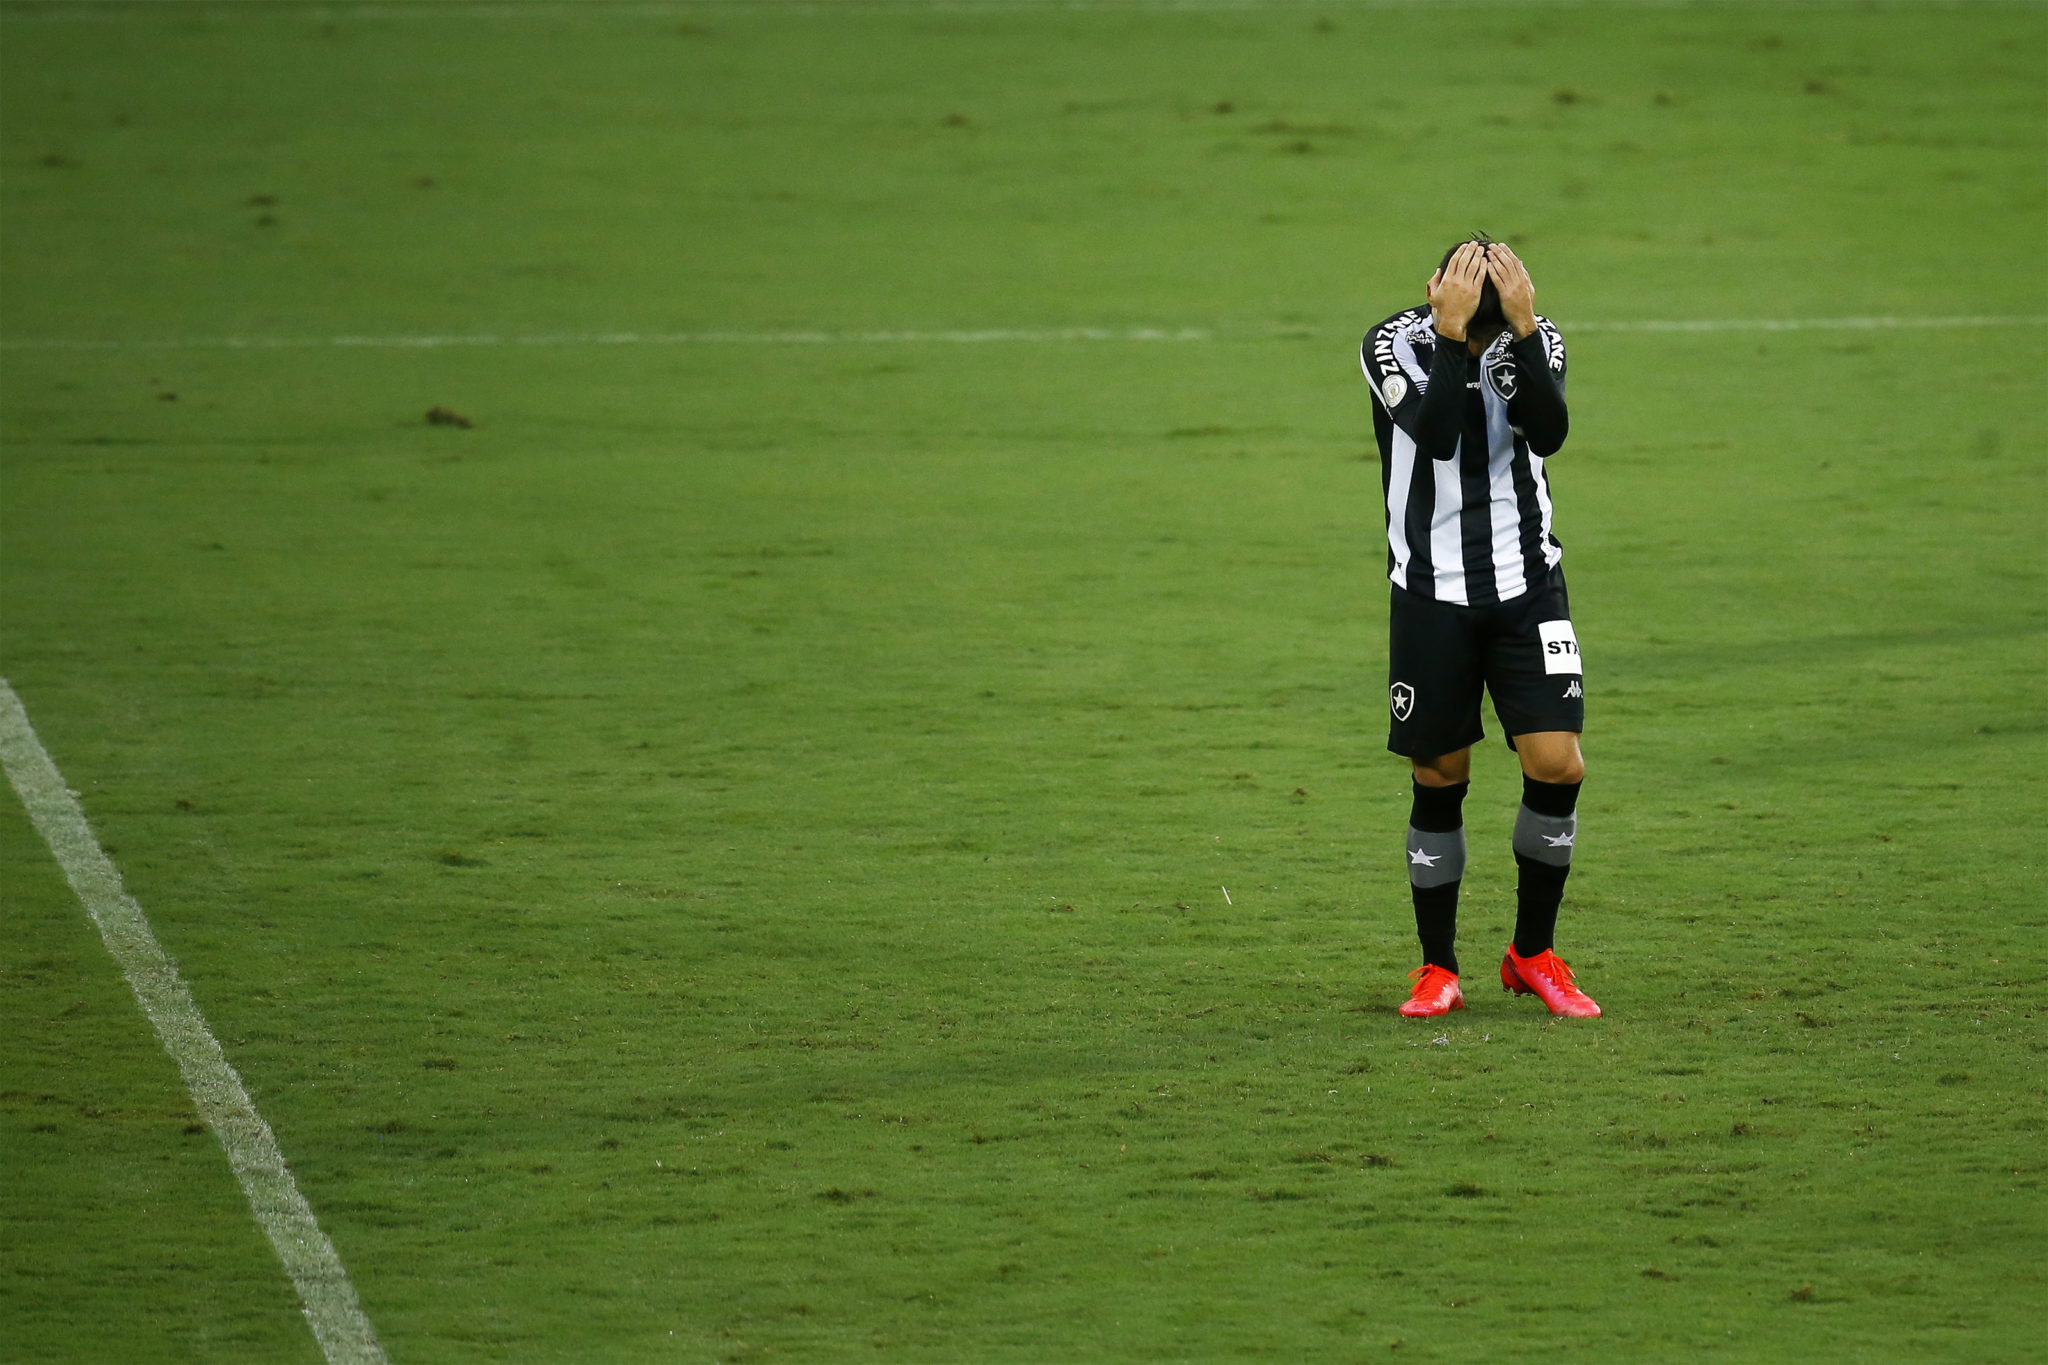 RIO DE JANEIRO, BRAZIL - OCTOBER 31: Victor Luis of Botafogo reacts after missing a penalty kick during the match between Botafogo and Ceara as part of the Brasileirao Series A at Engenhao Stadium on October 31, 2020 in Rio de Janeiro, Brazil. (Photo by Bruna Prado/Getty Images)